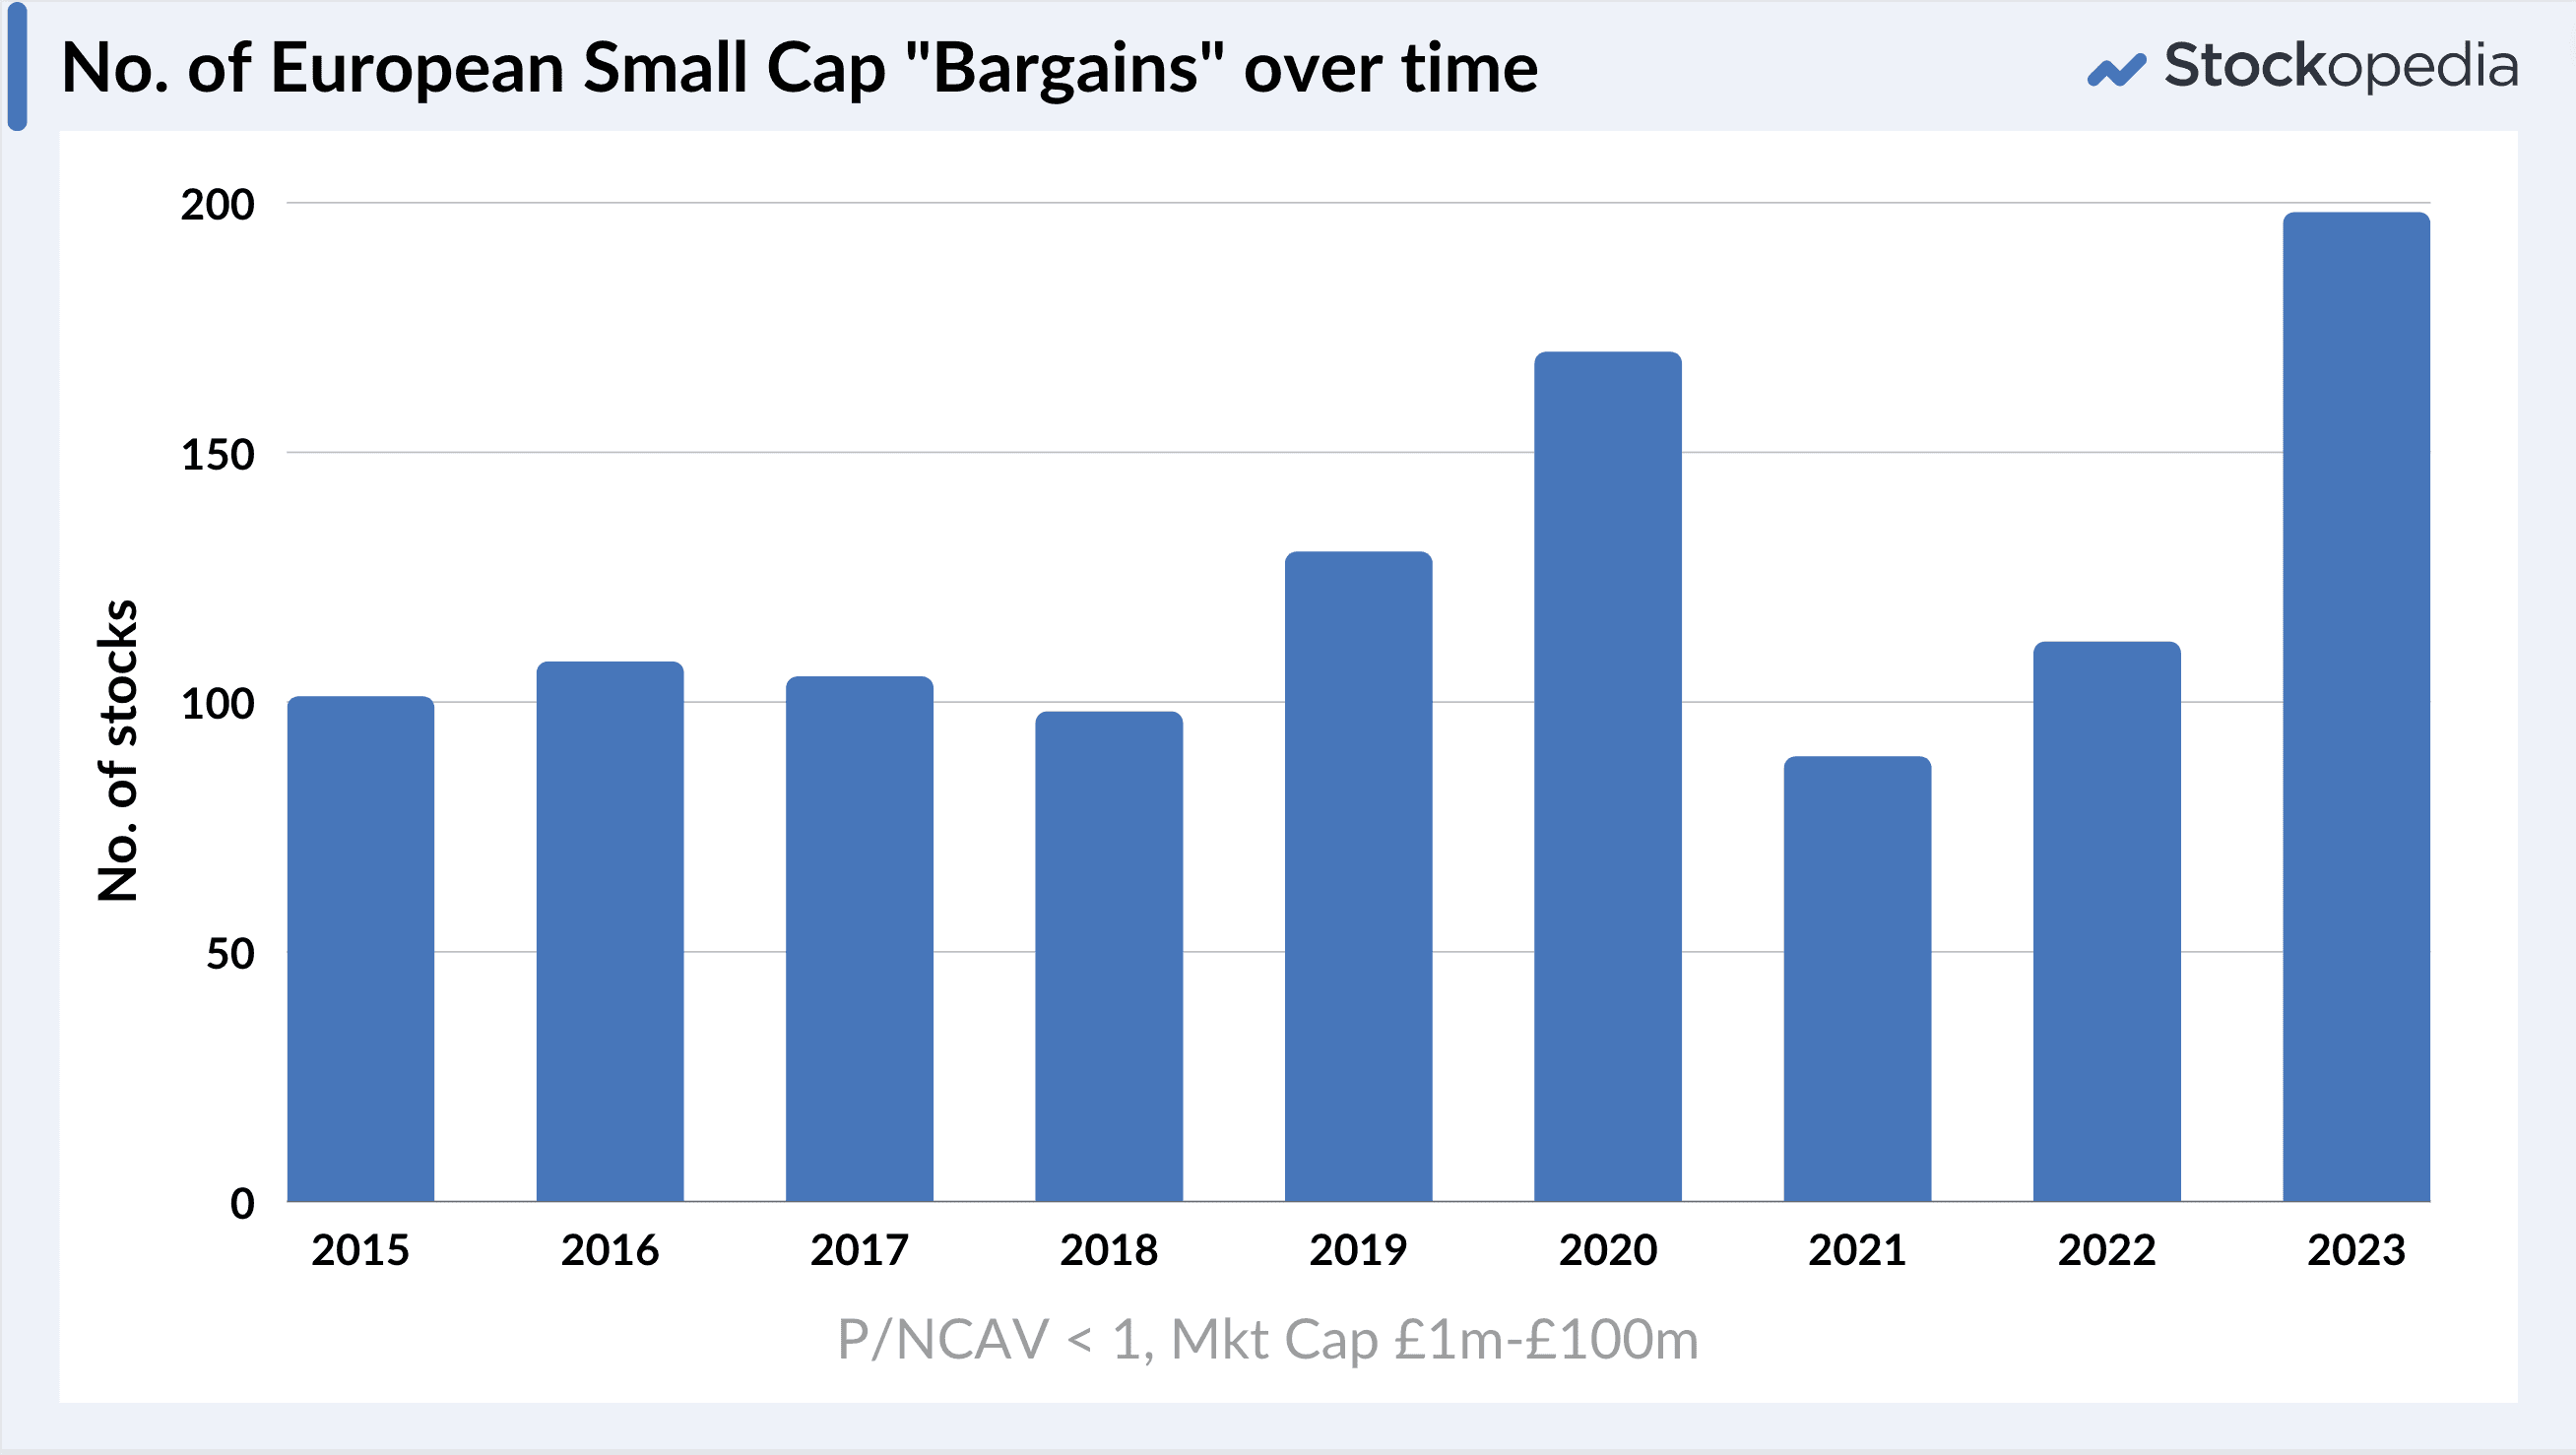 Number of European small cap bargains over time